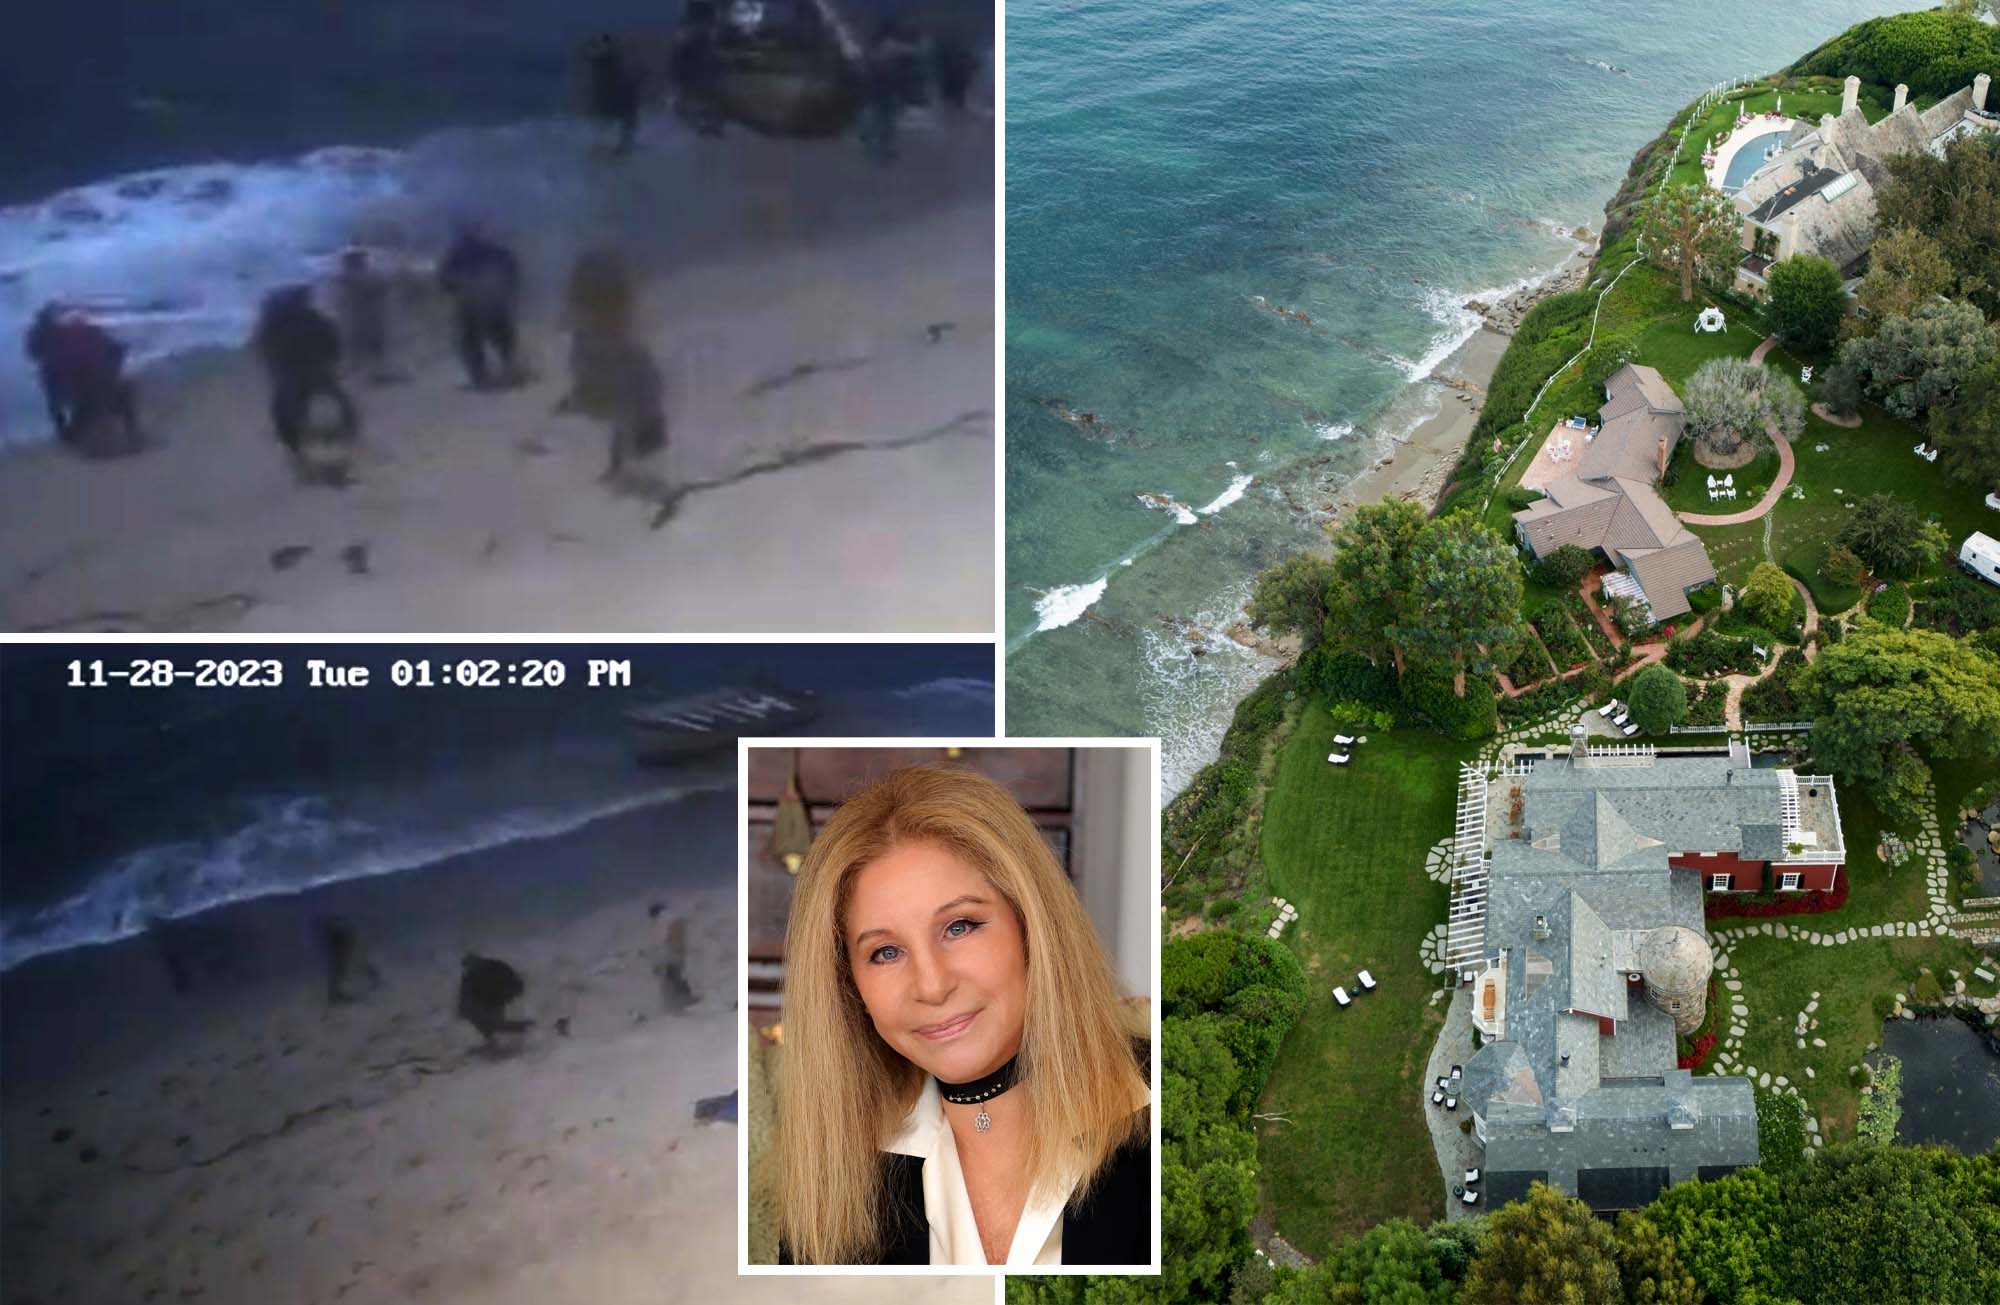 Boat With Suspected Migrants Lands Near Barbra Streisand’s Malibu Home